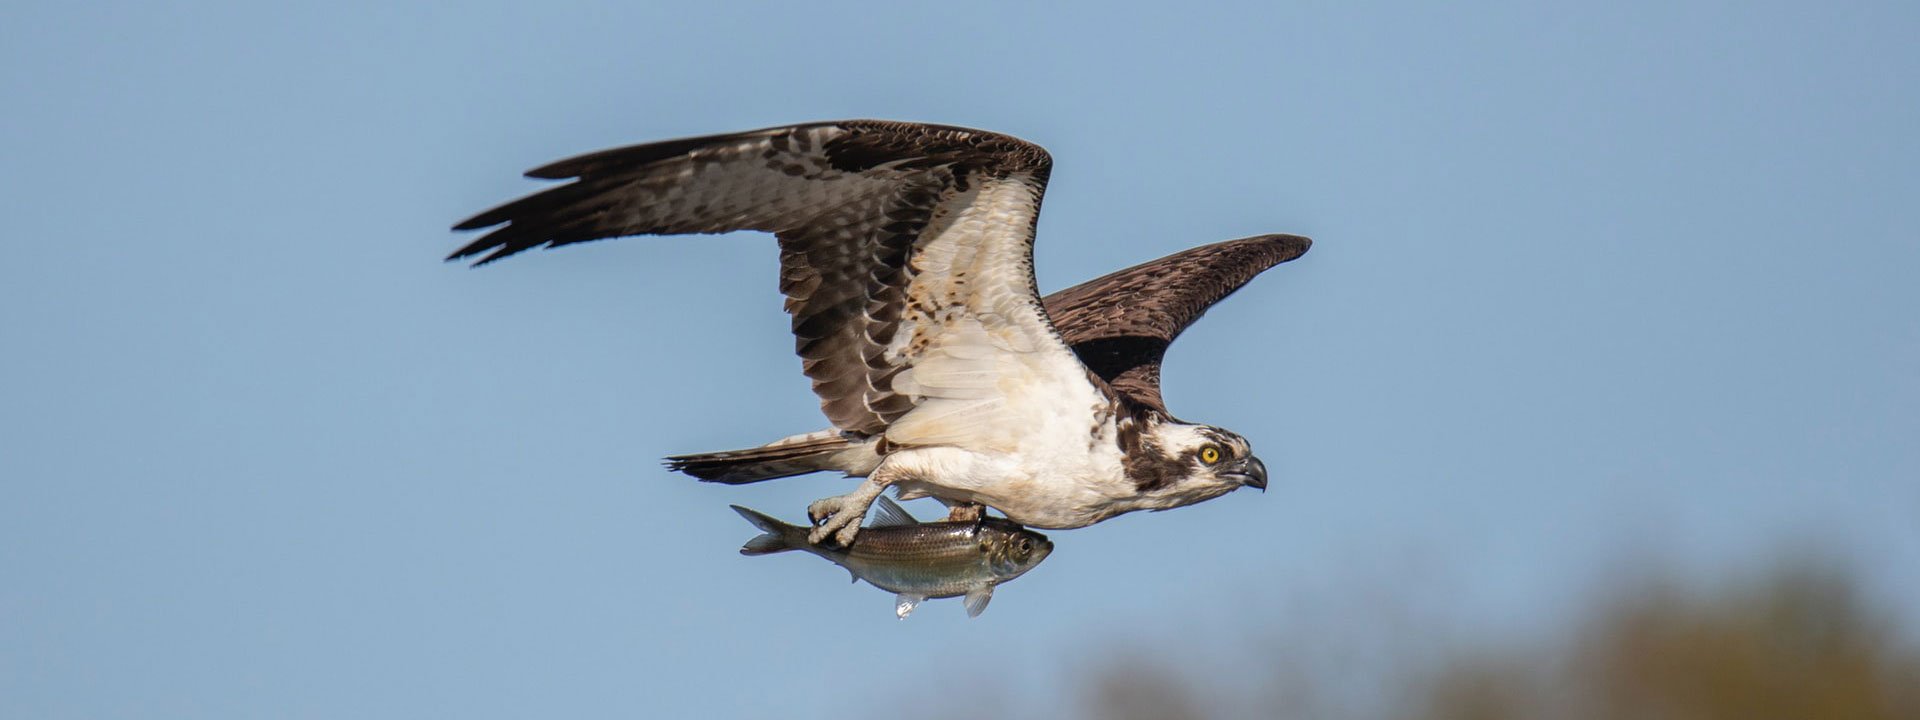 osprey in flight with caught fish photo by Keith Luke on Unsplash